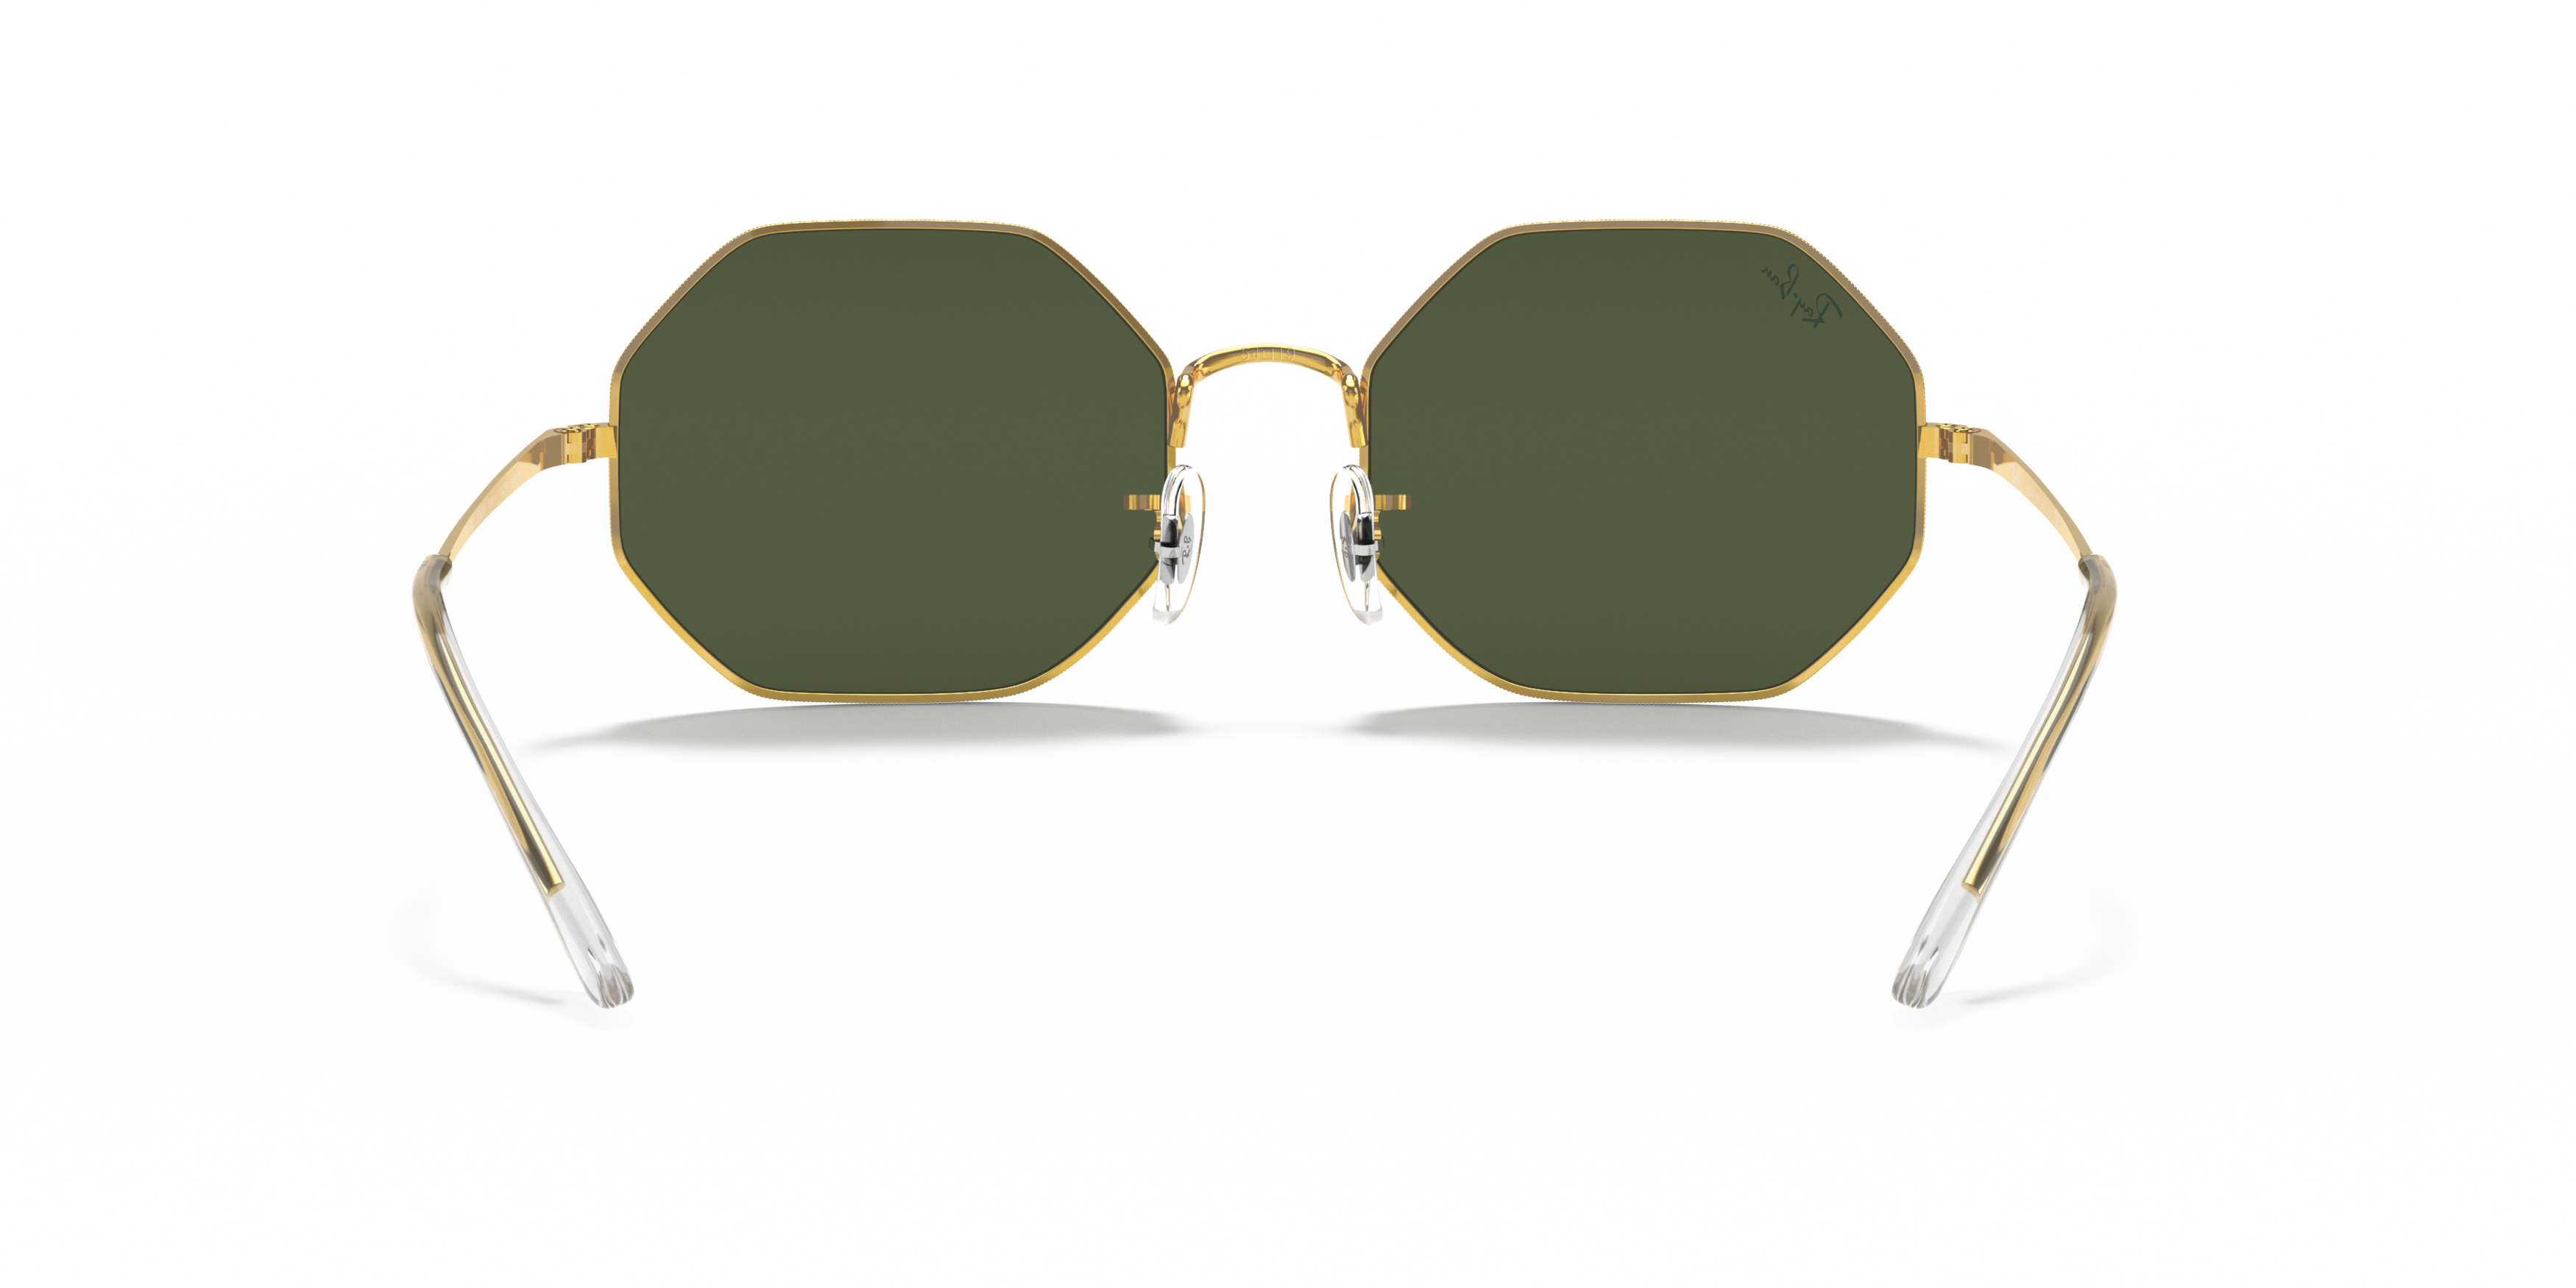 Detail02 Ray-Ban Octagon RB 1972 (919631) Sunglasses Green / Gold